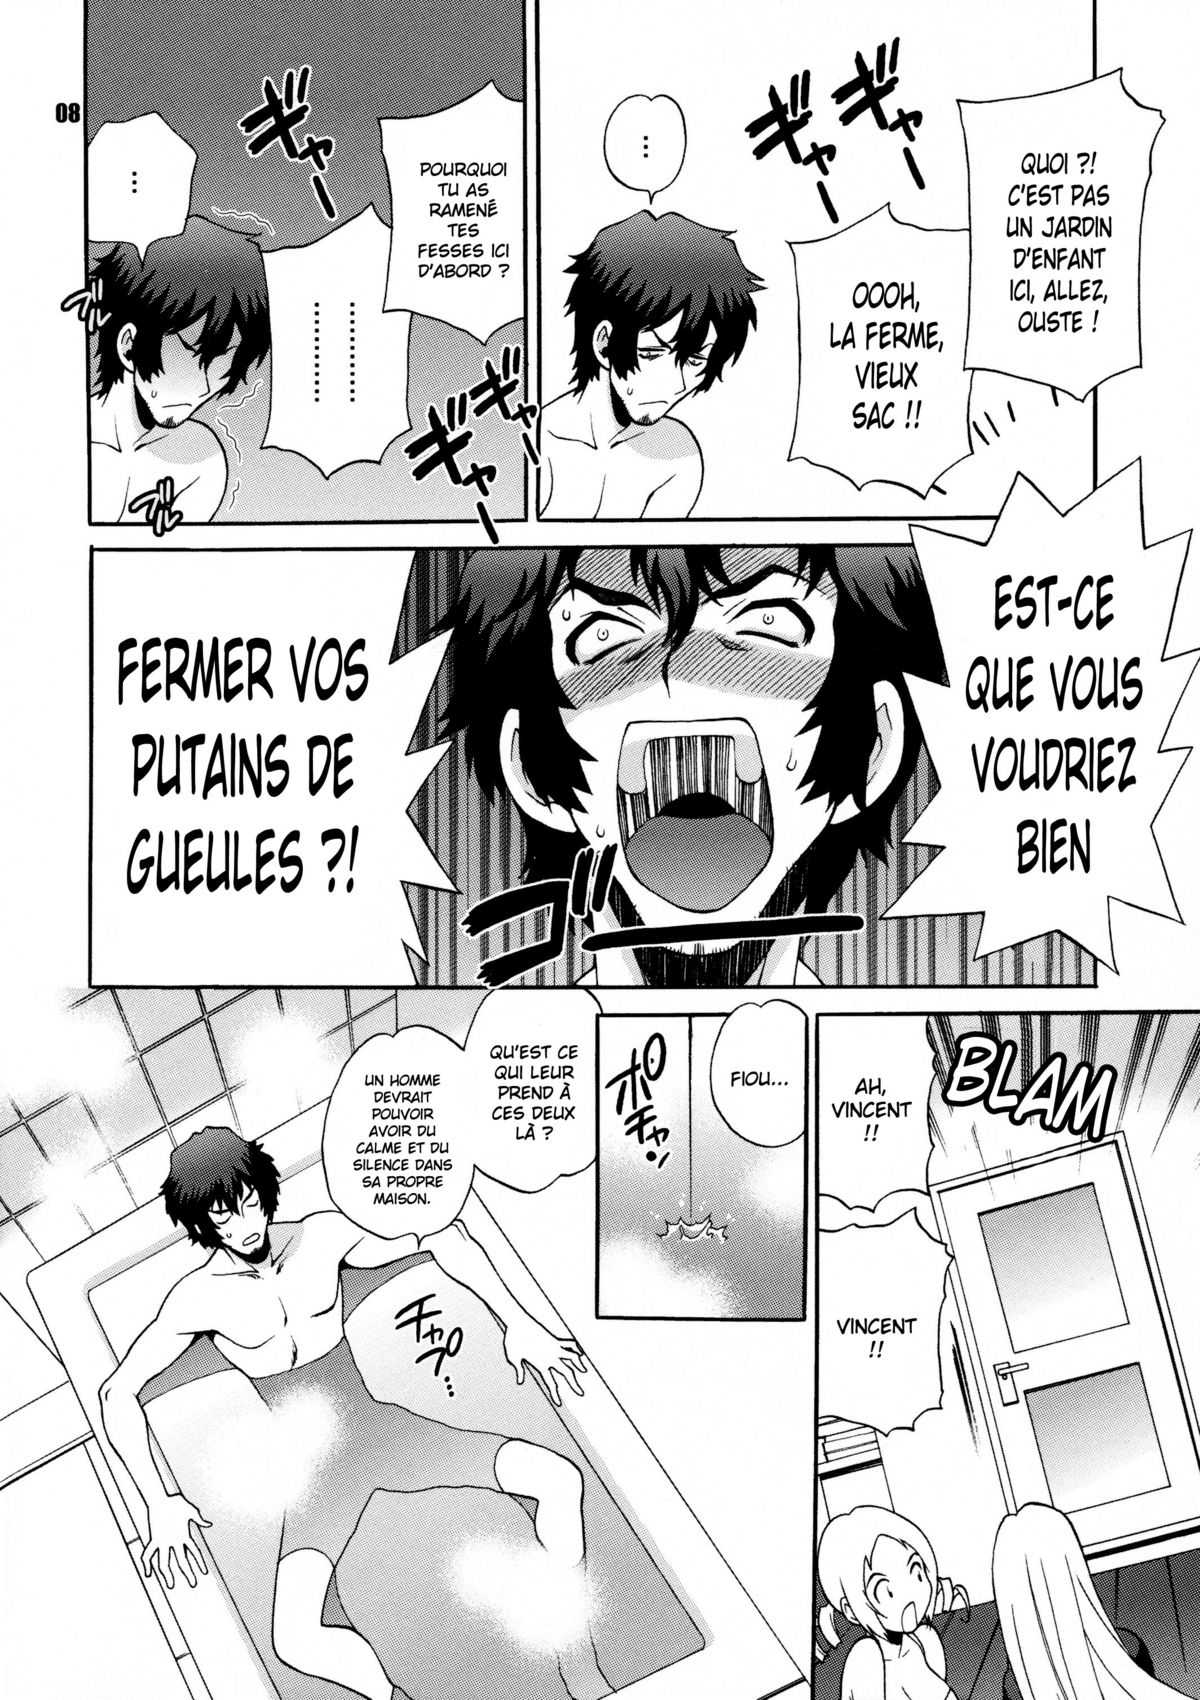 [Shallot Coco] Catherine Katerine! [French] 